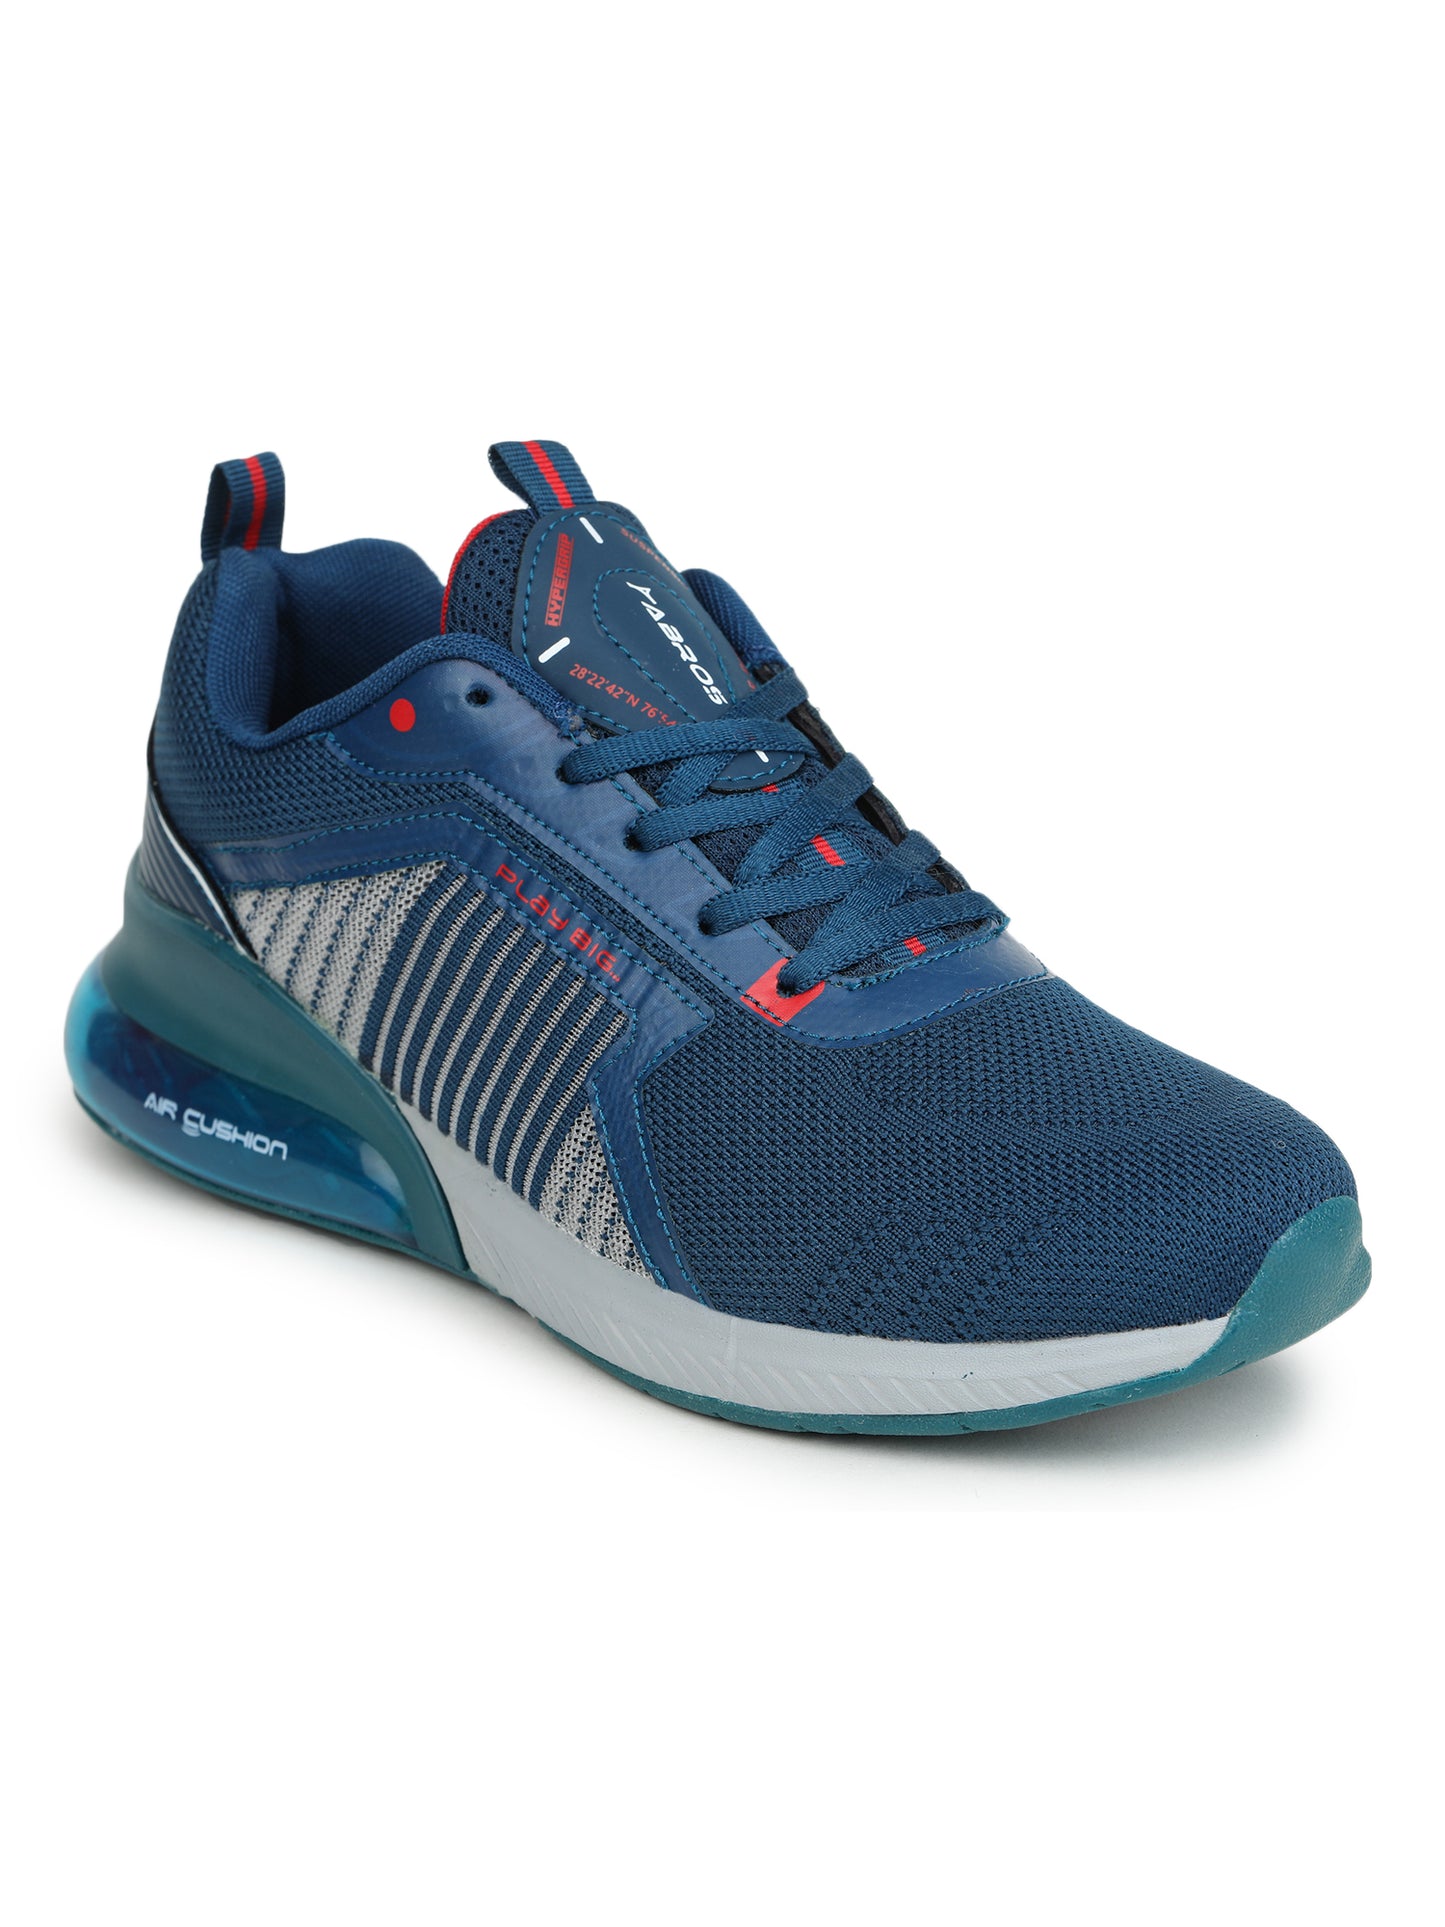 ABROS THOR SPORT-SHOES For MEN'S